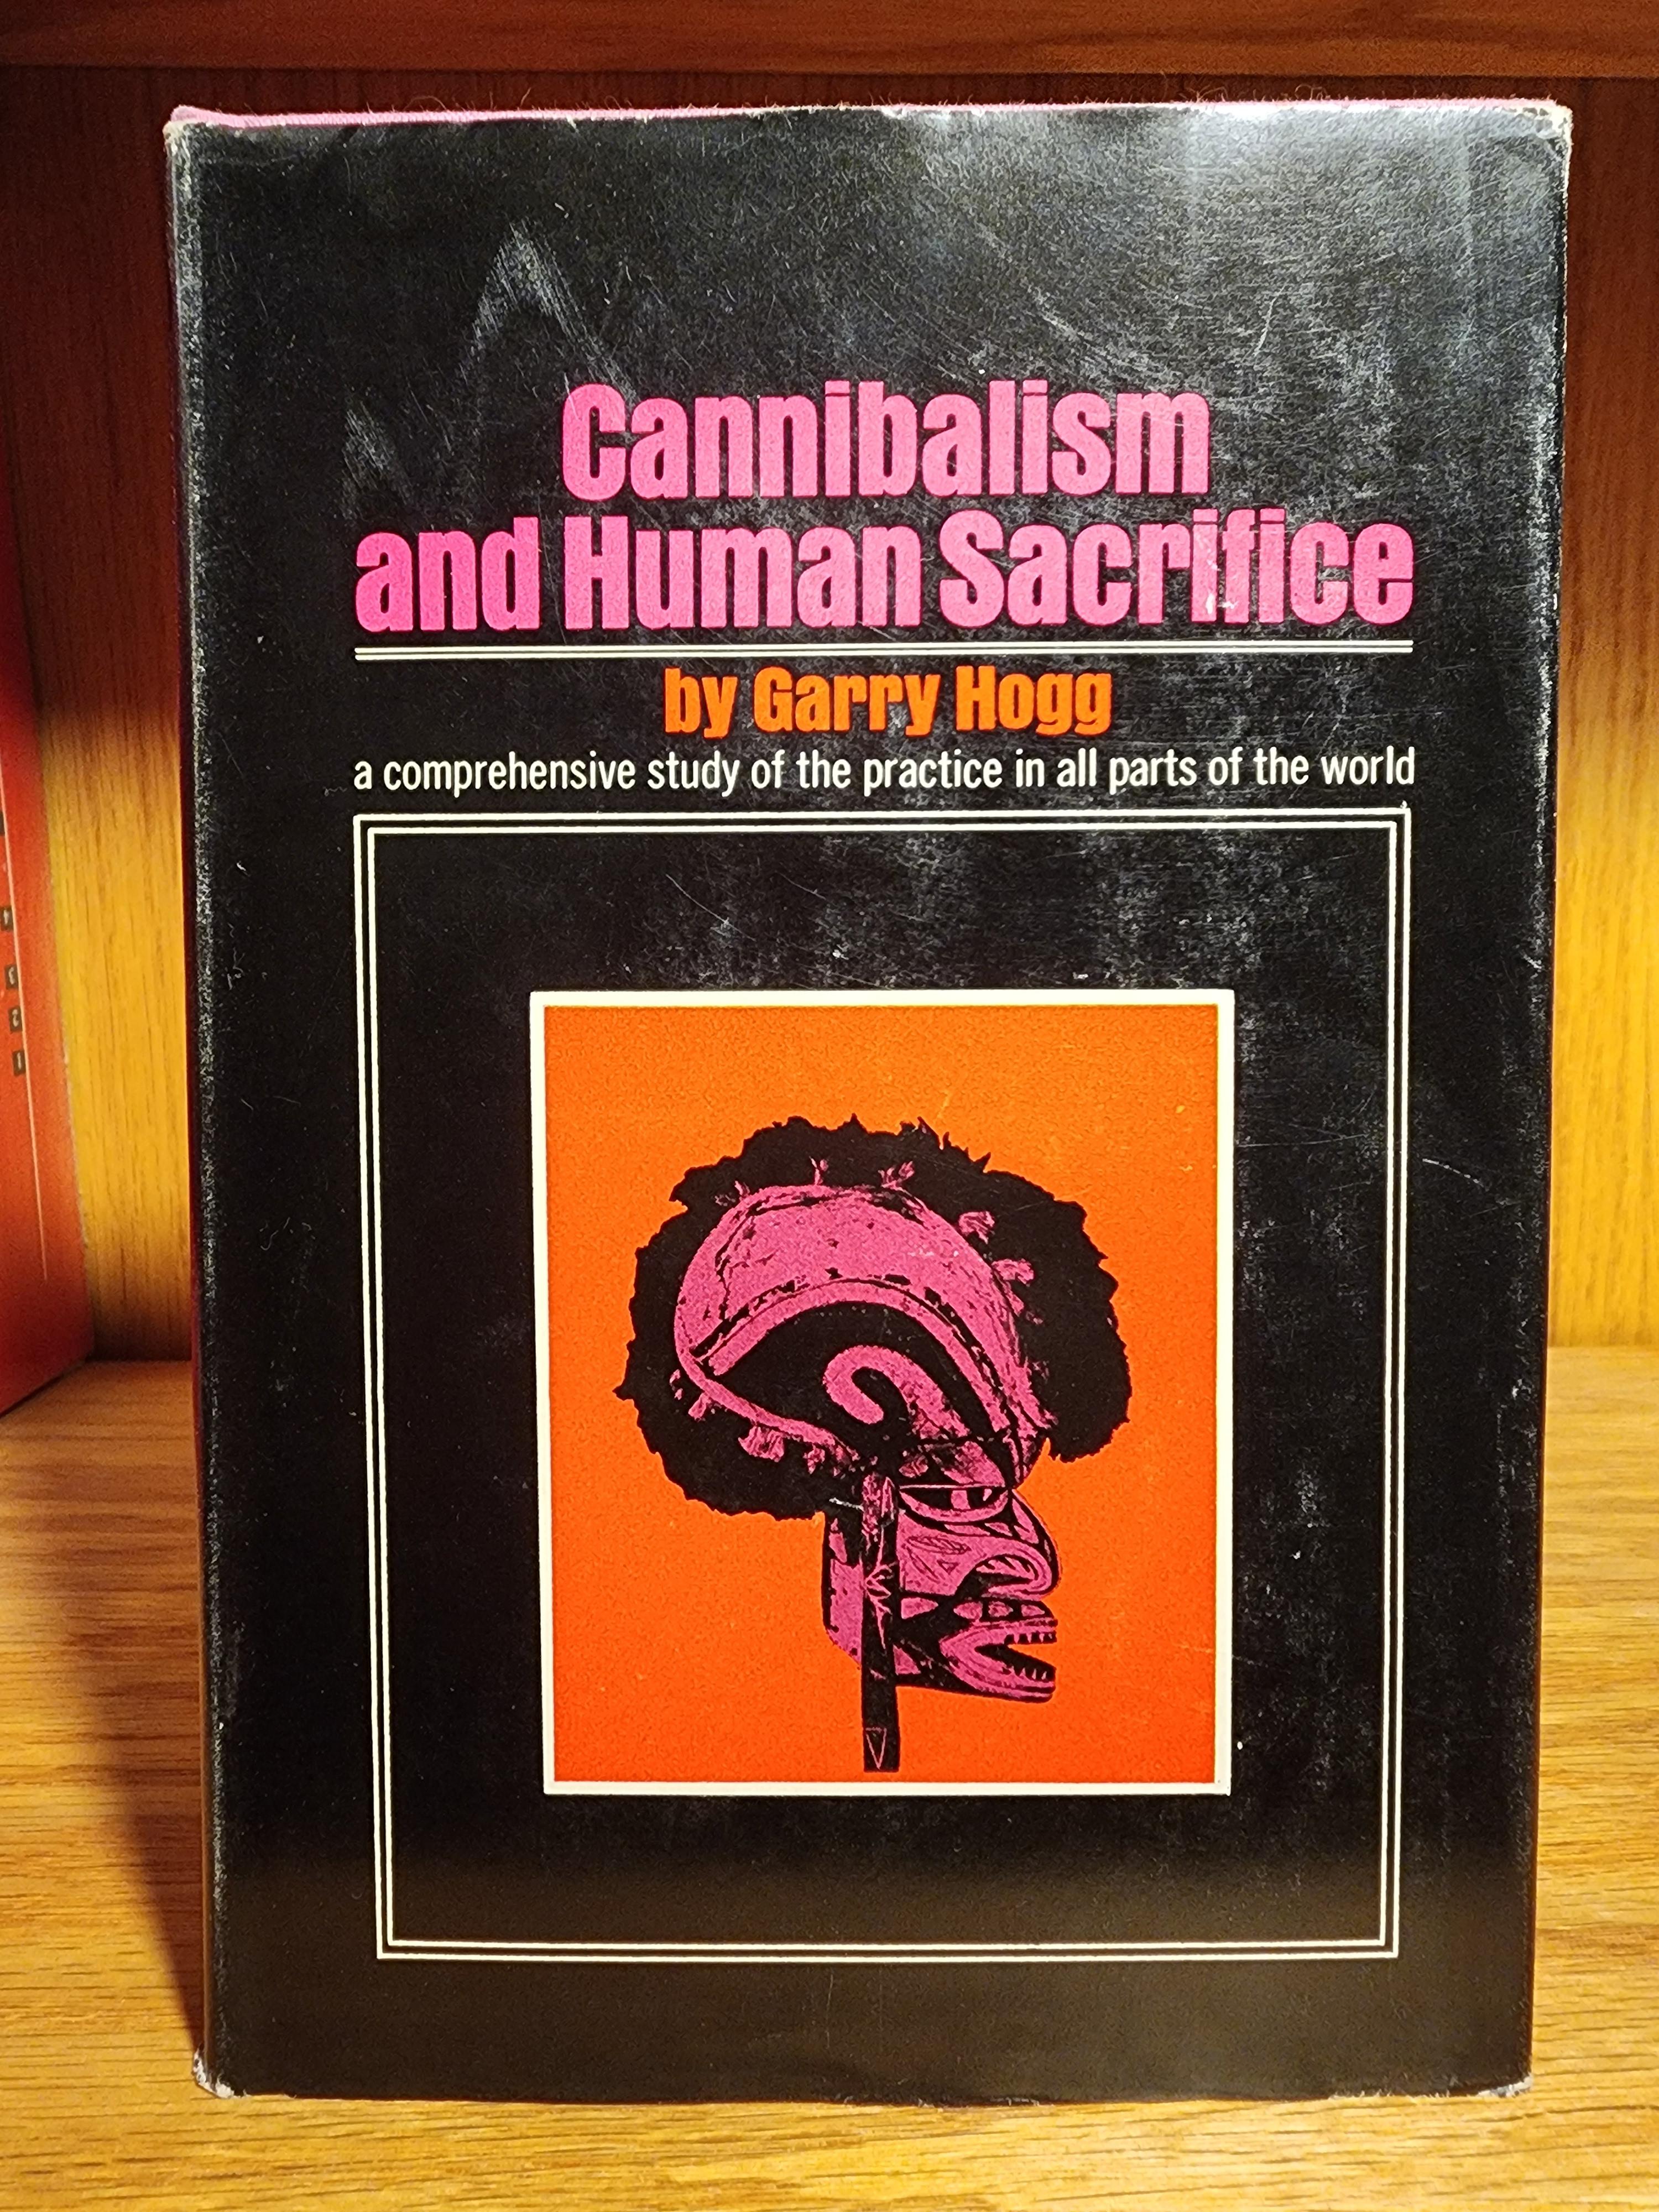 Cannibalism and Human Sacrifice by Garry Hogg The Citadel Press 1966